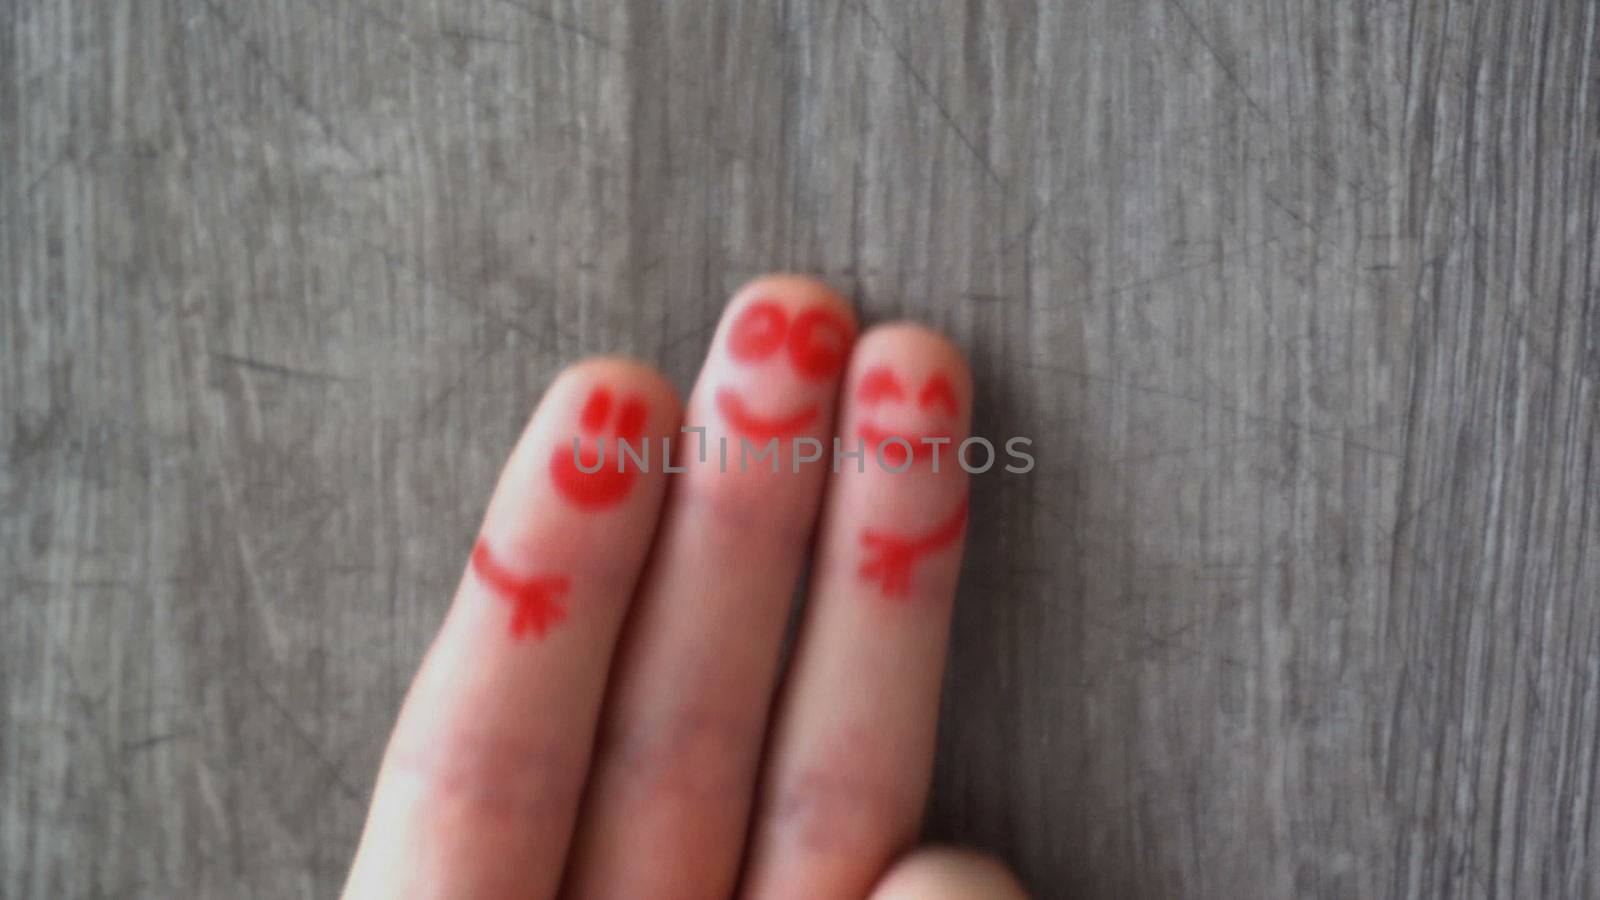 happy fingers.beautiful faces painted on the toes by nolimit046